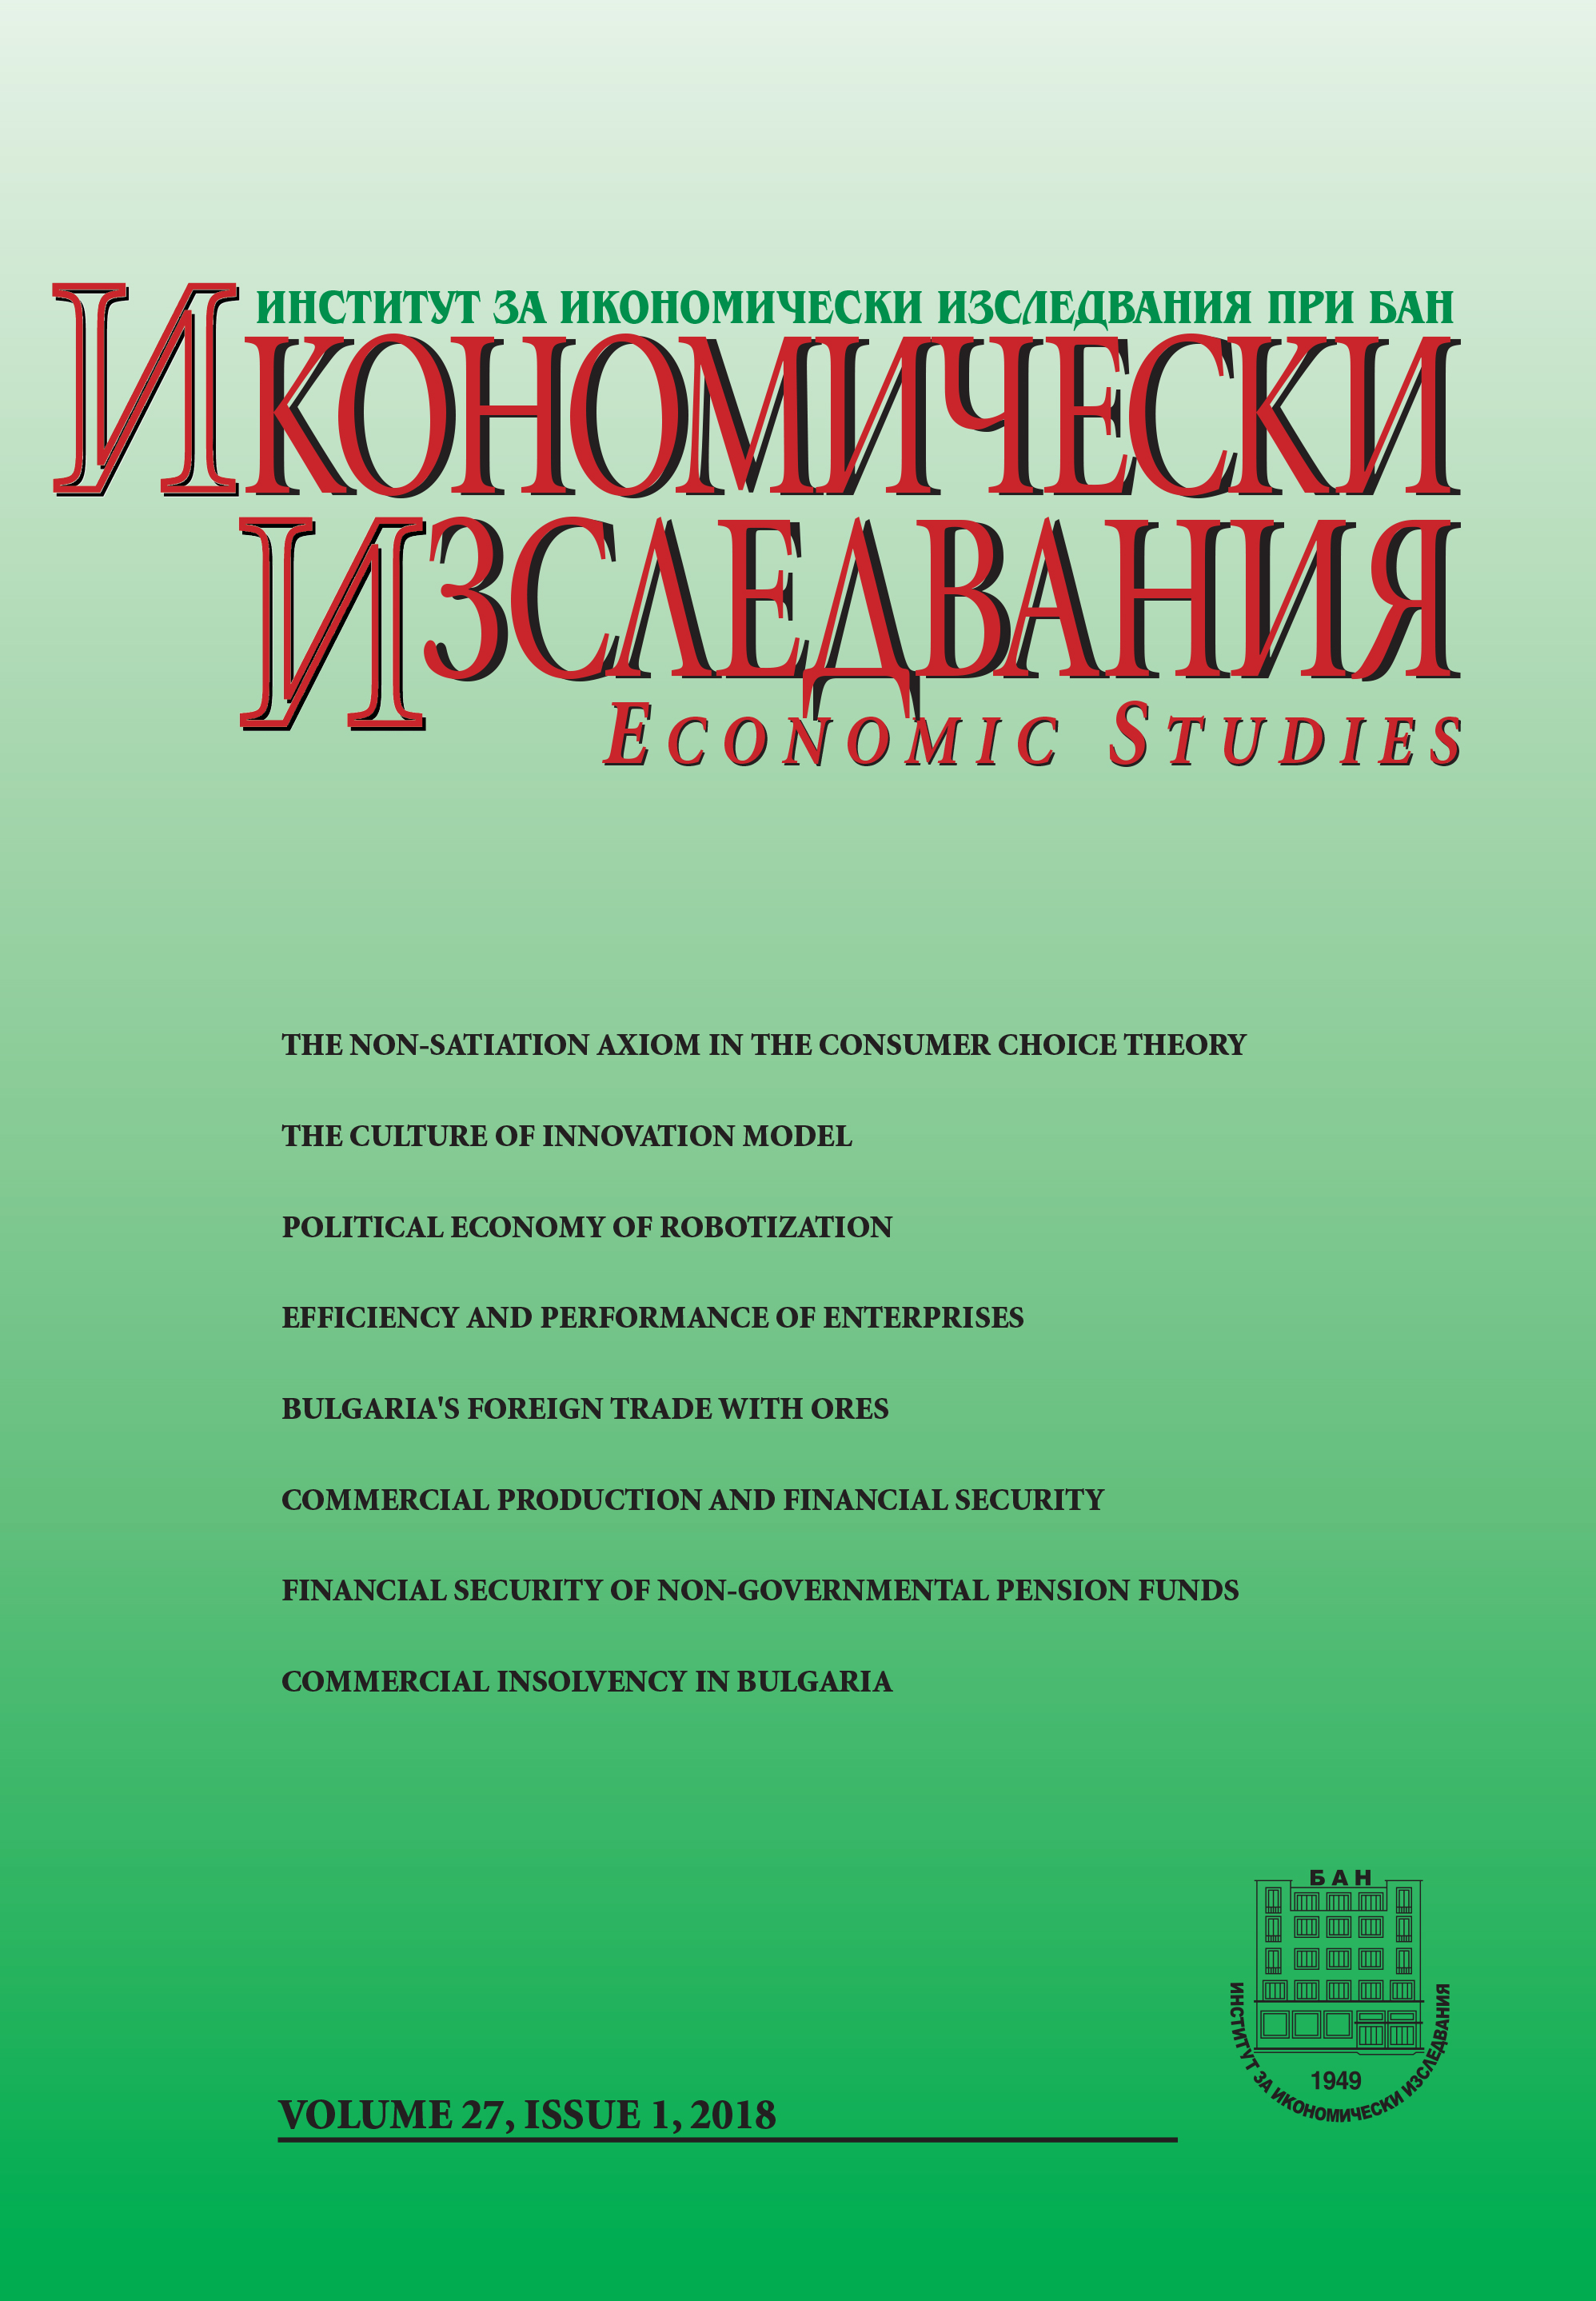 Commercial Insolvency in Bulgaria through the Eyes of Generations at Work: Challenges and Possible Solutions Cover Image